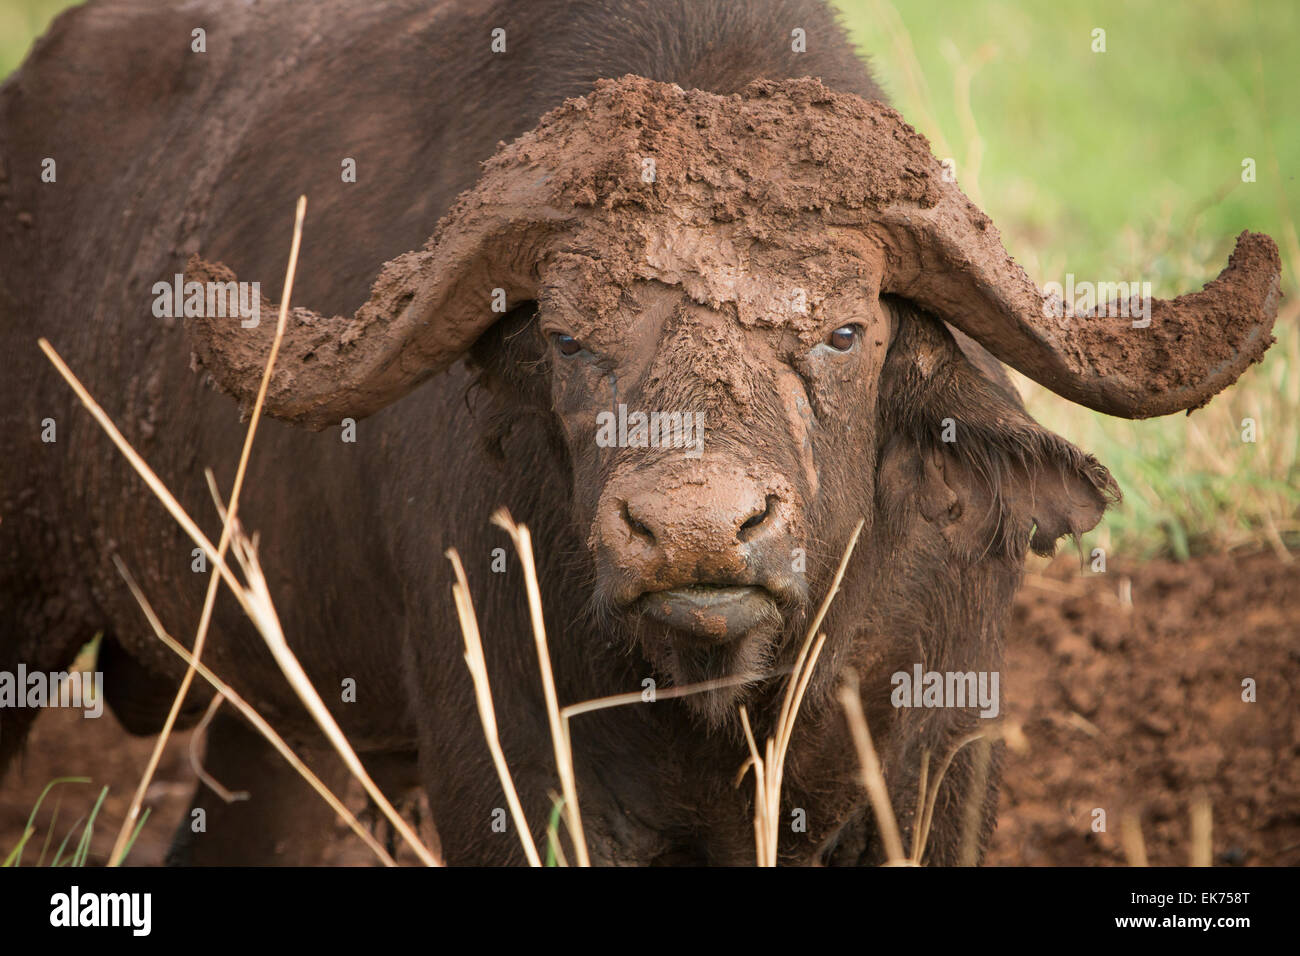 Cape Buffalo at Kidepo Valley National Park in Northern Uganda, East Africa Stock Photo